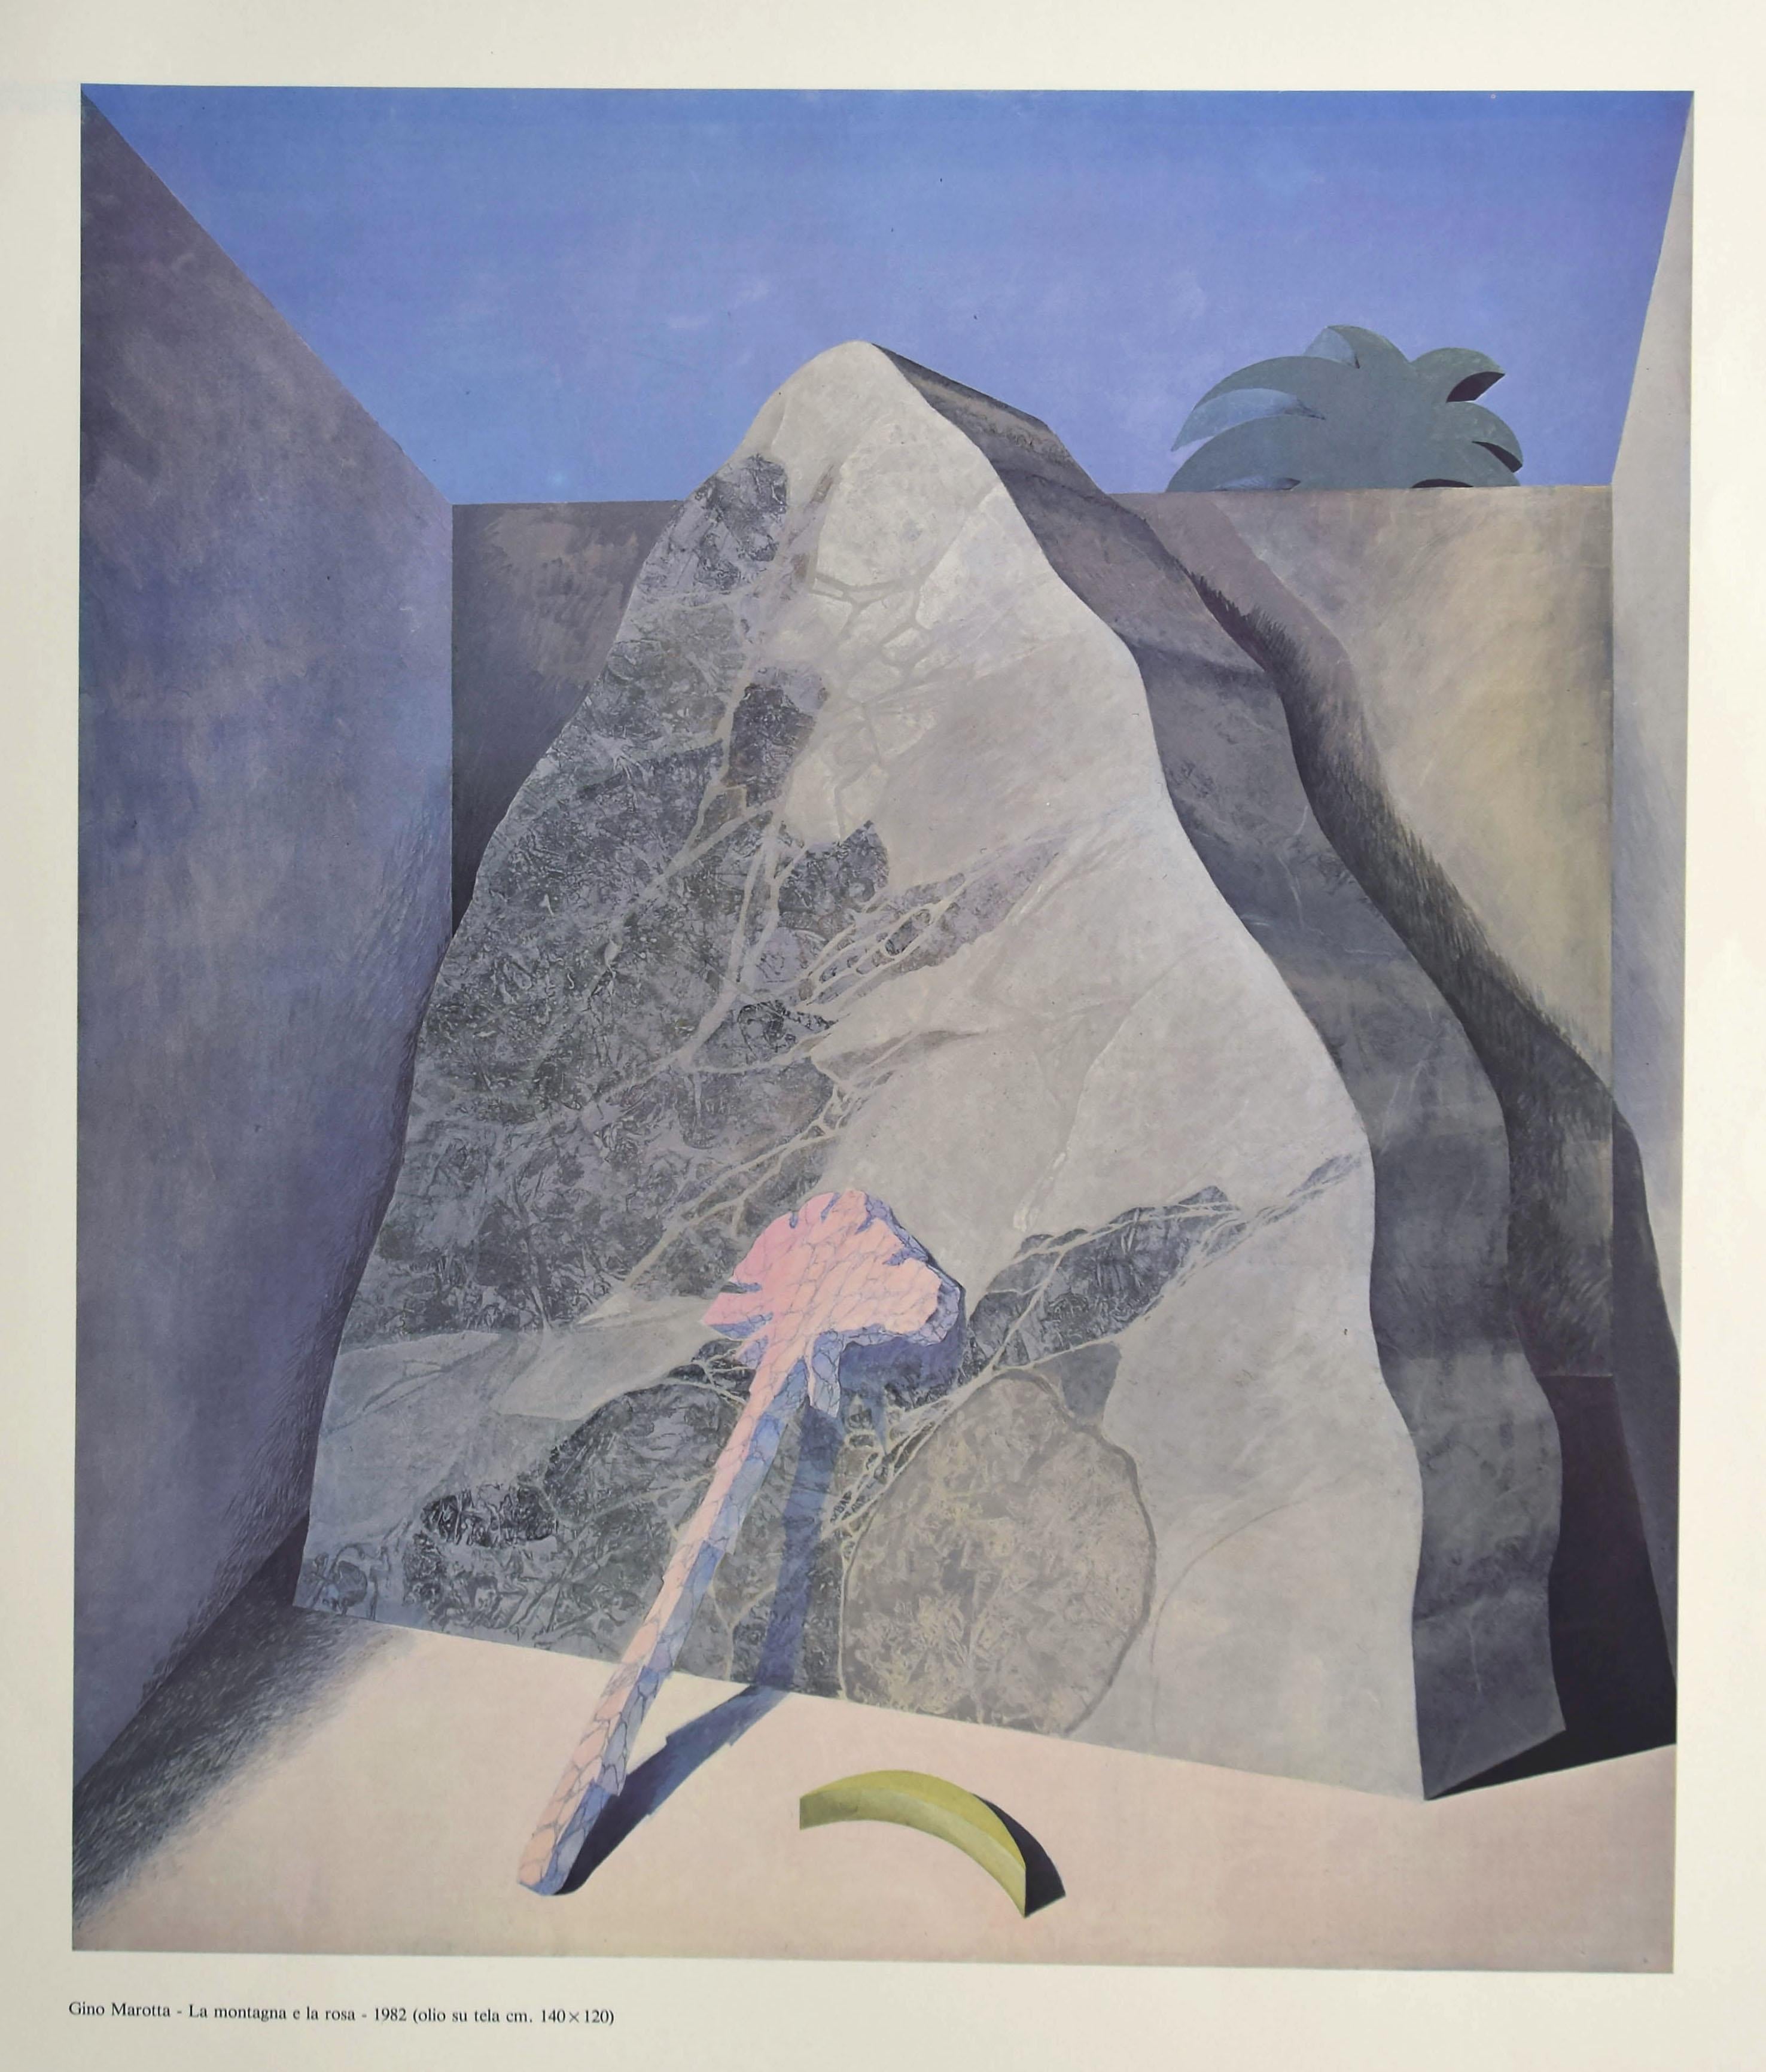 Gino Marotta Figurative Print - The Mountain and the Rose - Vintage Poster After G. Marotta - 1982